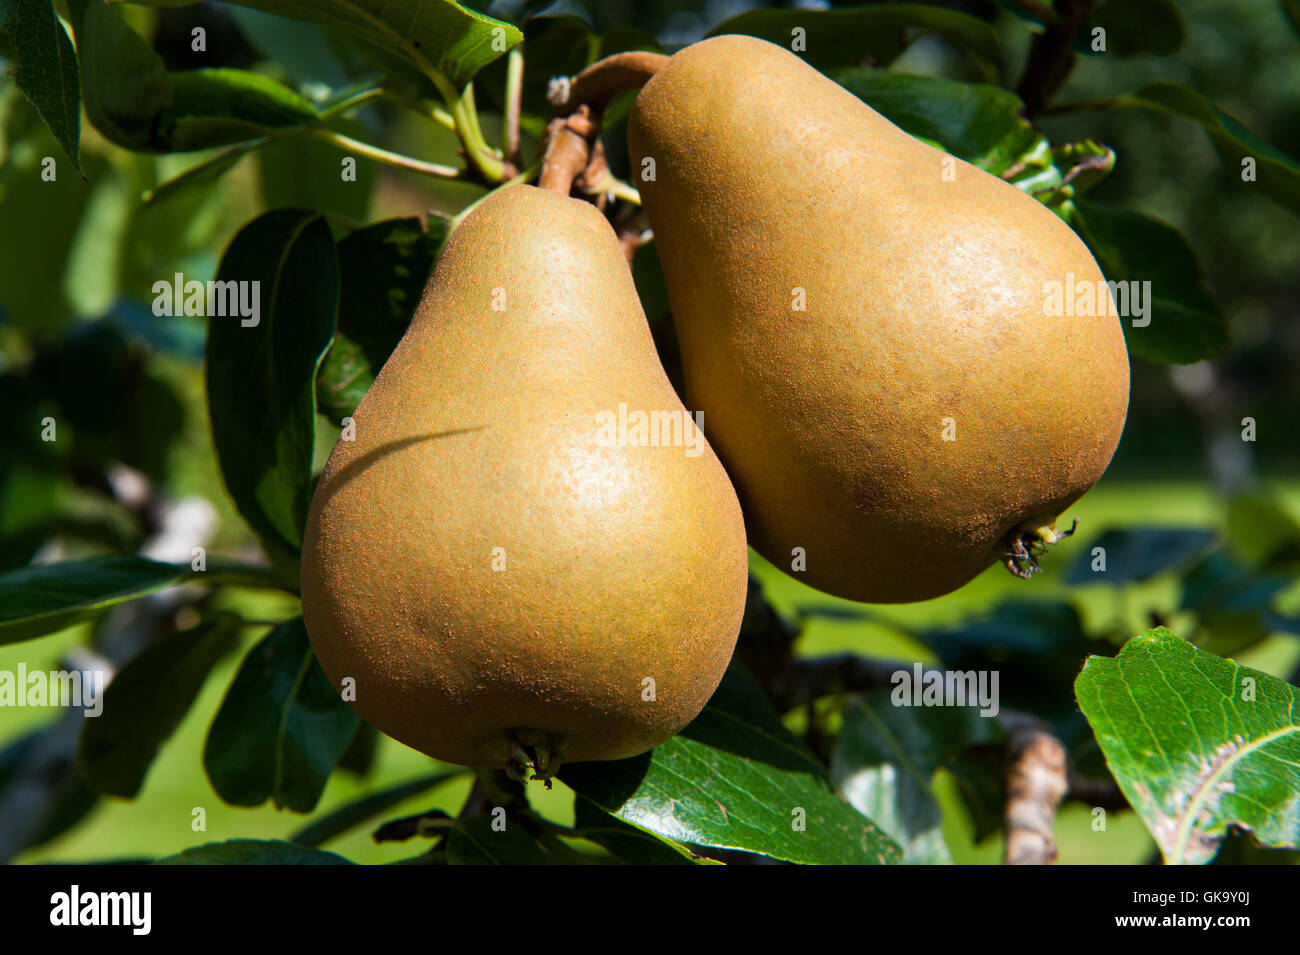 Two tasty fresh pears growing on the tree Stock Photo